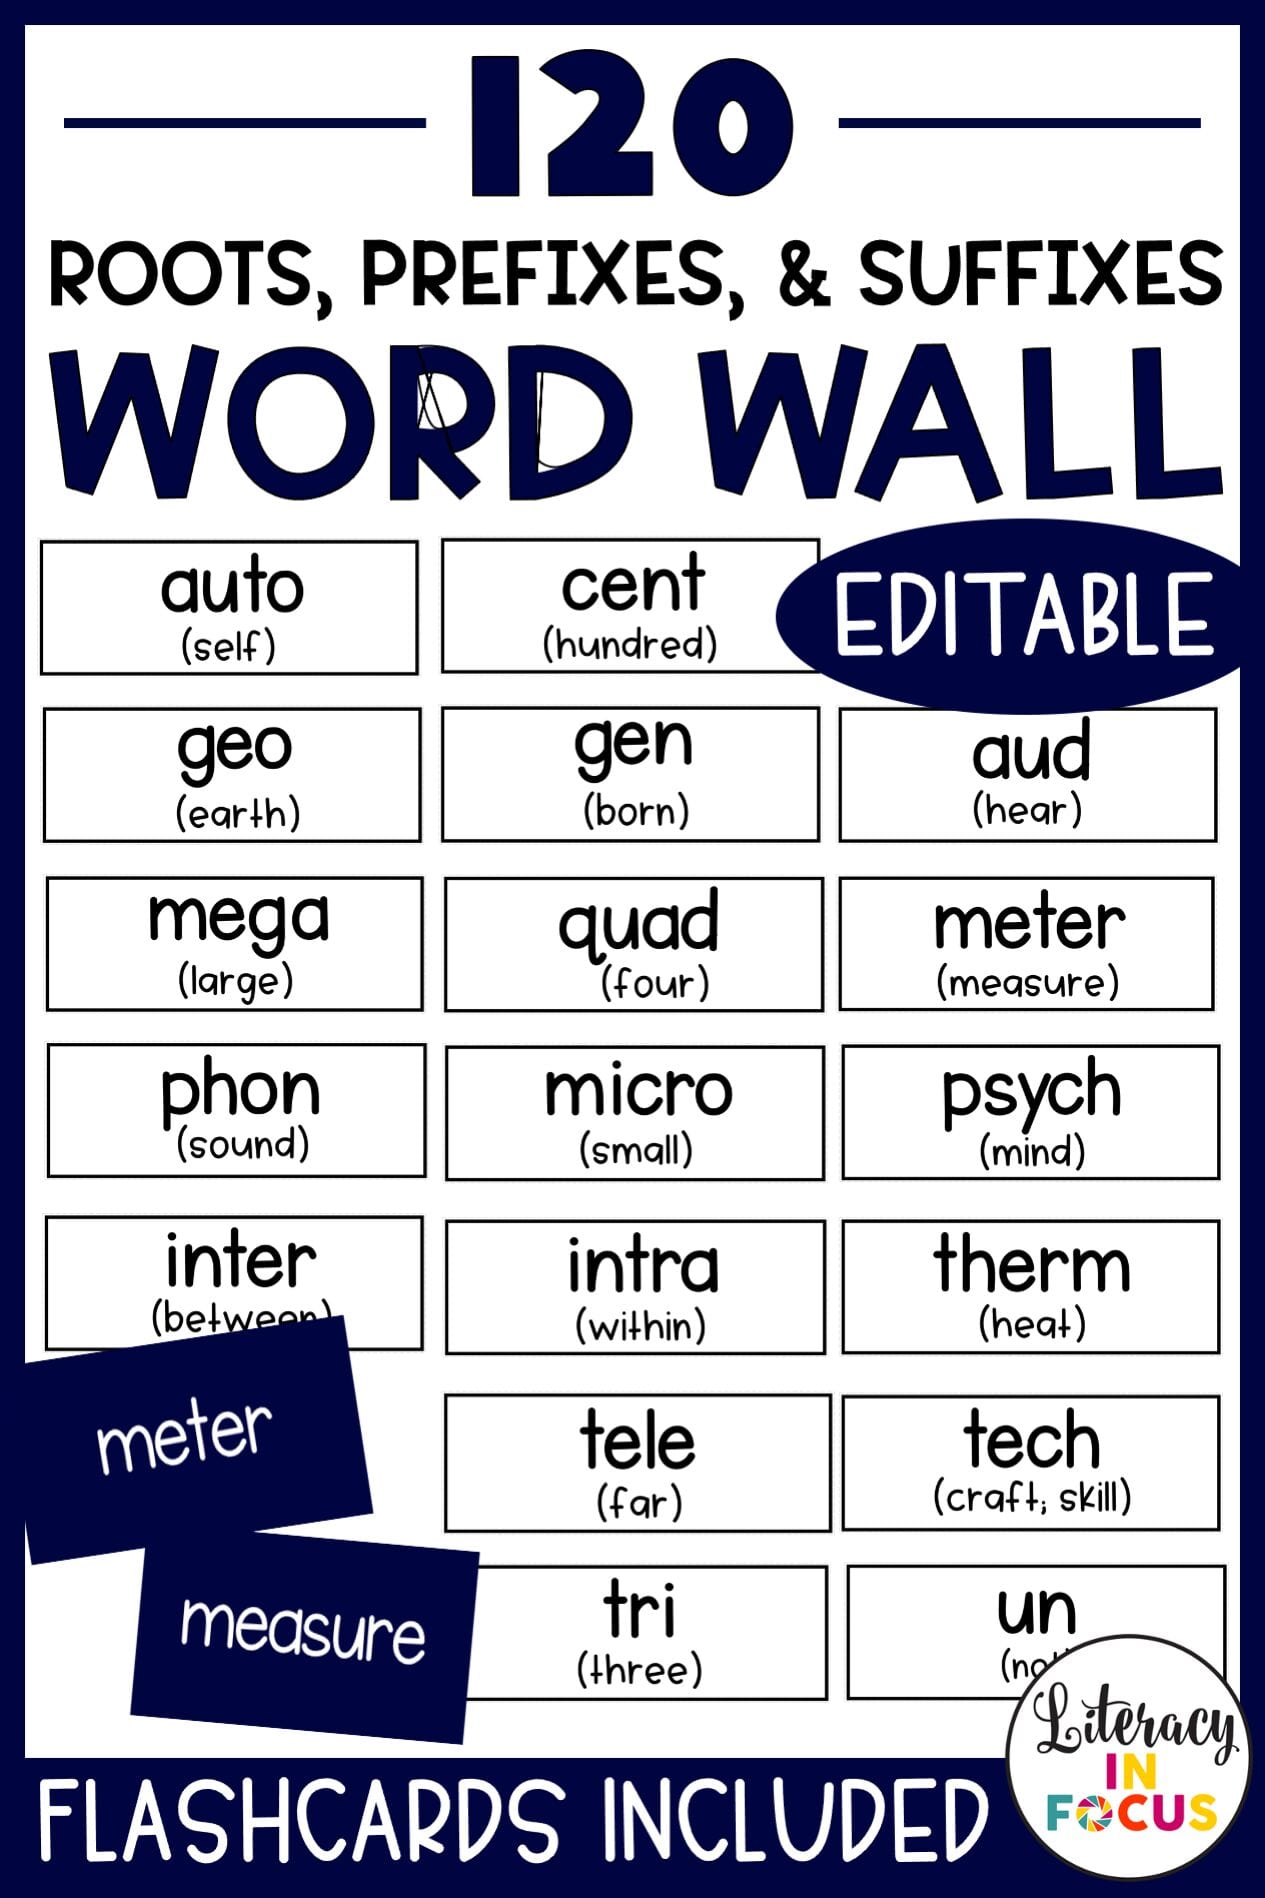 Friday 8/ 29/14! Study for your quiz on Word Wall words and have